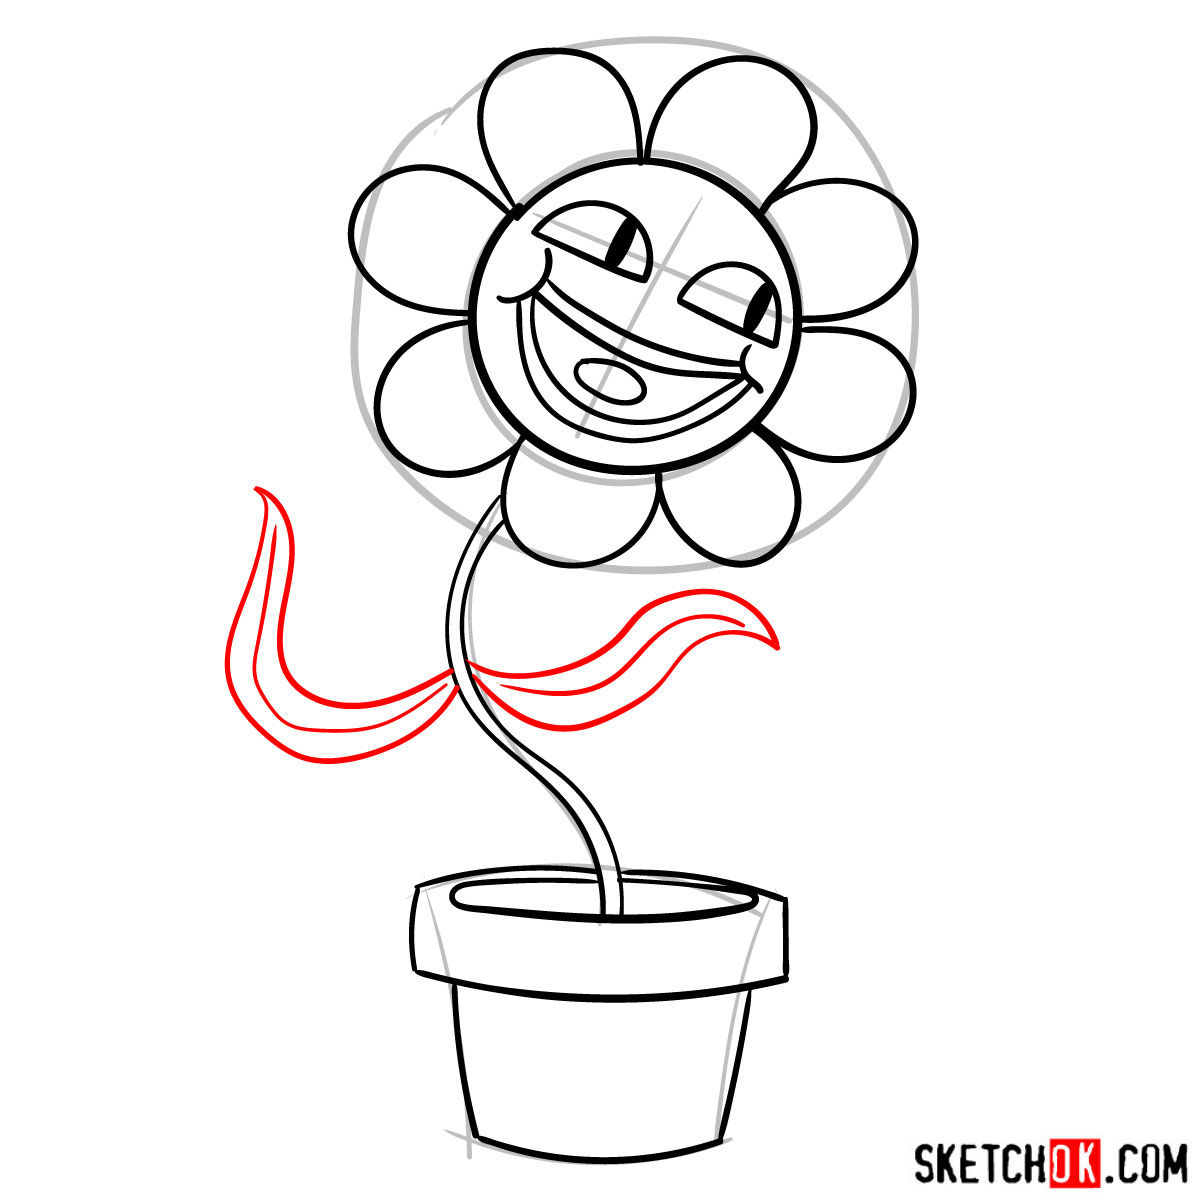 How to draw a pink flower Leslie from Gumball series - step 07